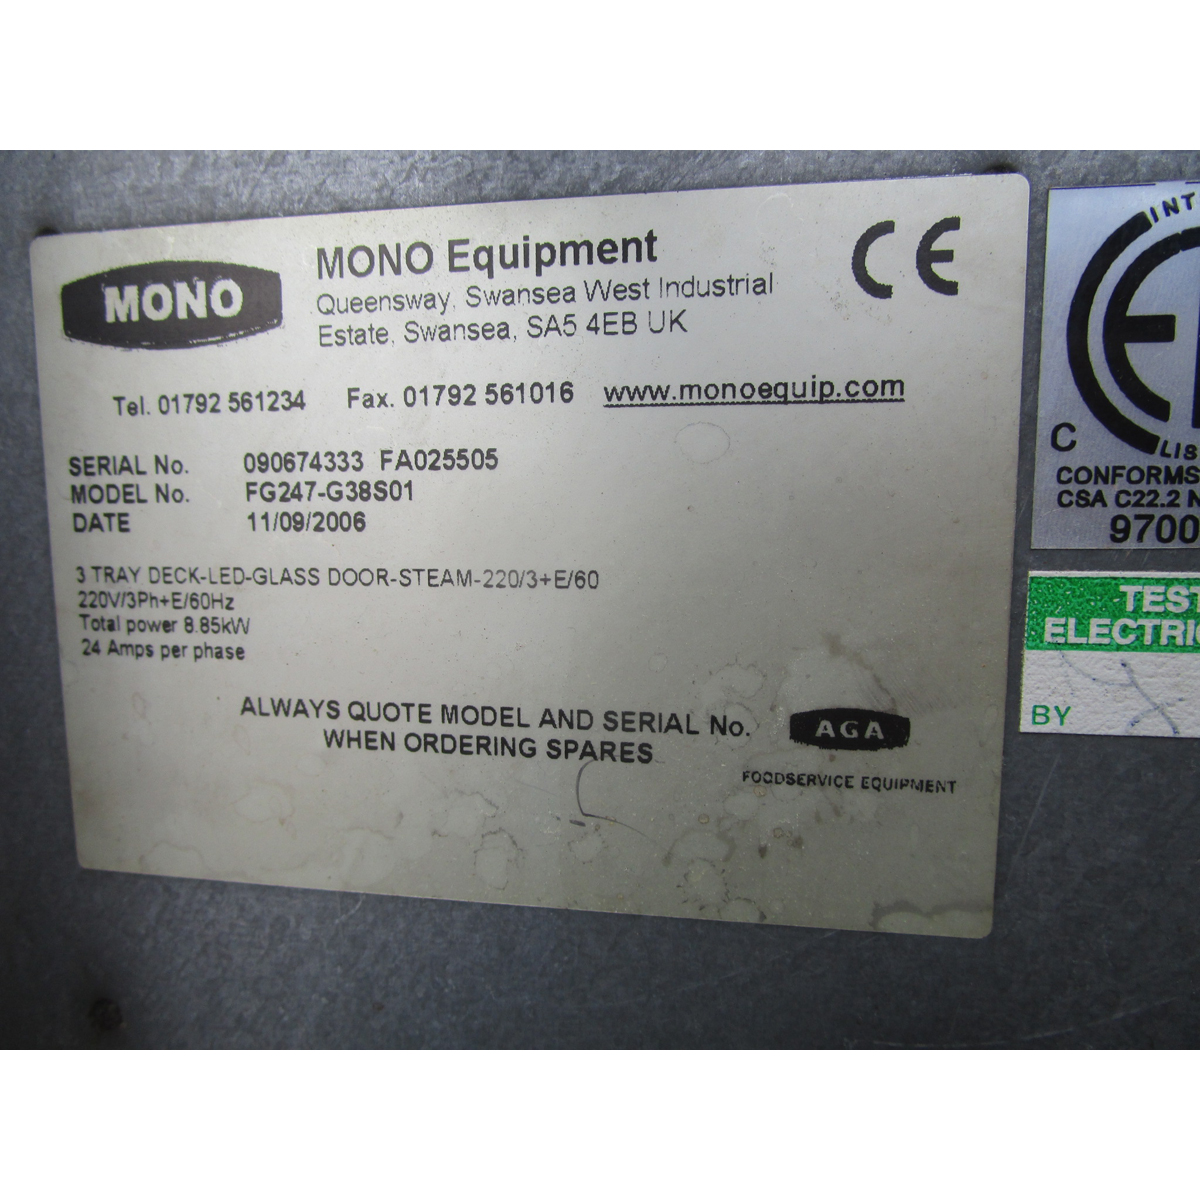 Mono FG247-G28S01 Electric 3 Deck Oven, Used Good Condition image 9